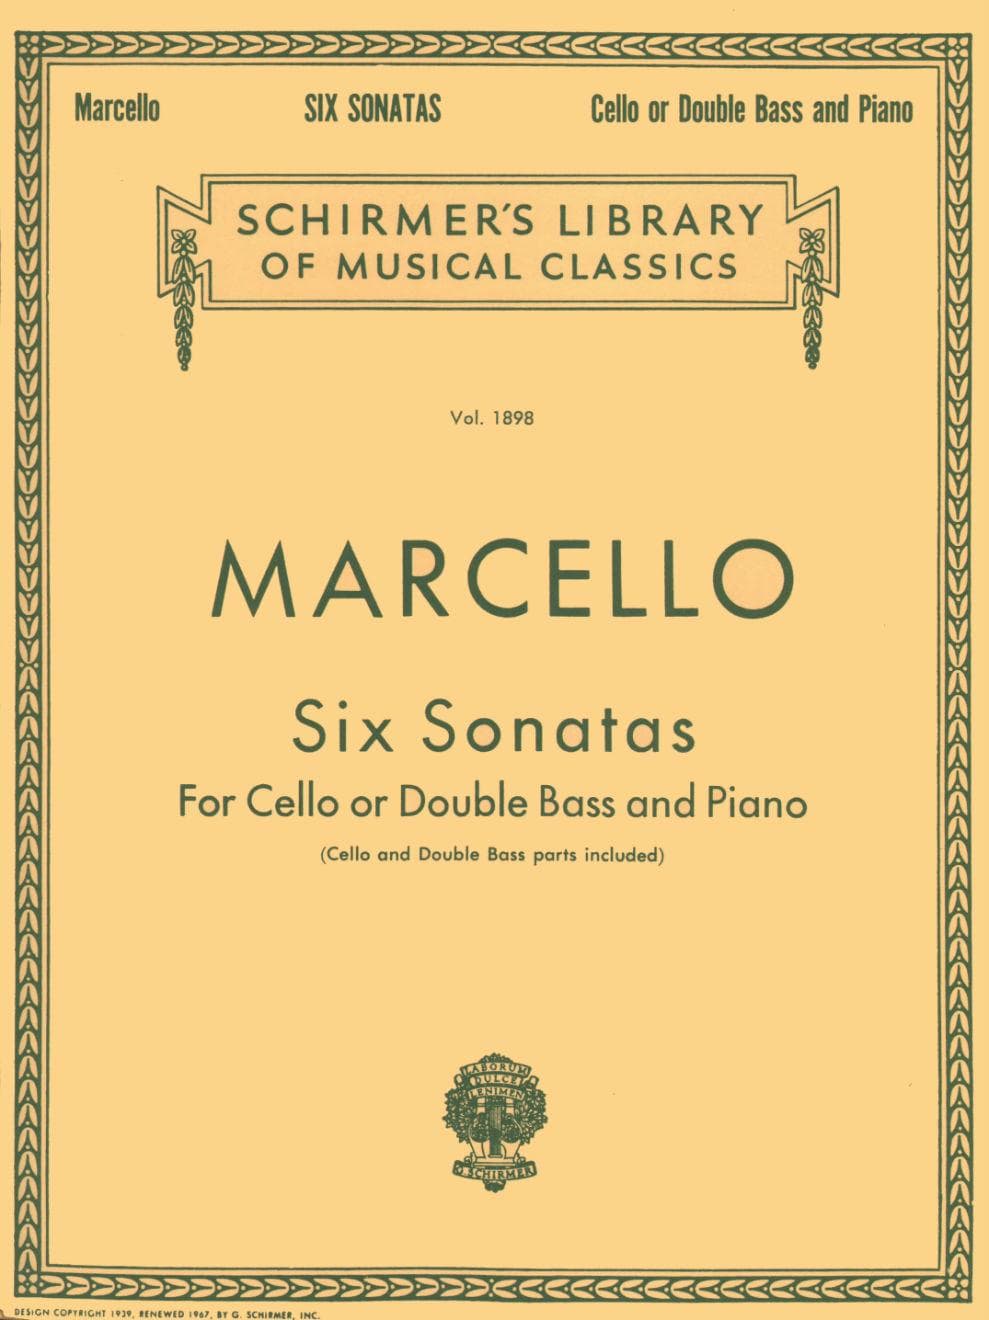 Marcello, Benedetto - Six Sonatas - Cello (or Bass) and Piano - edited by Analee Bacon and Lucas Drew - G Schirmer Edition